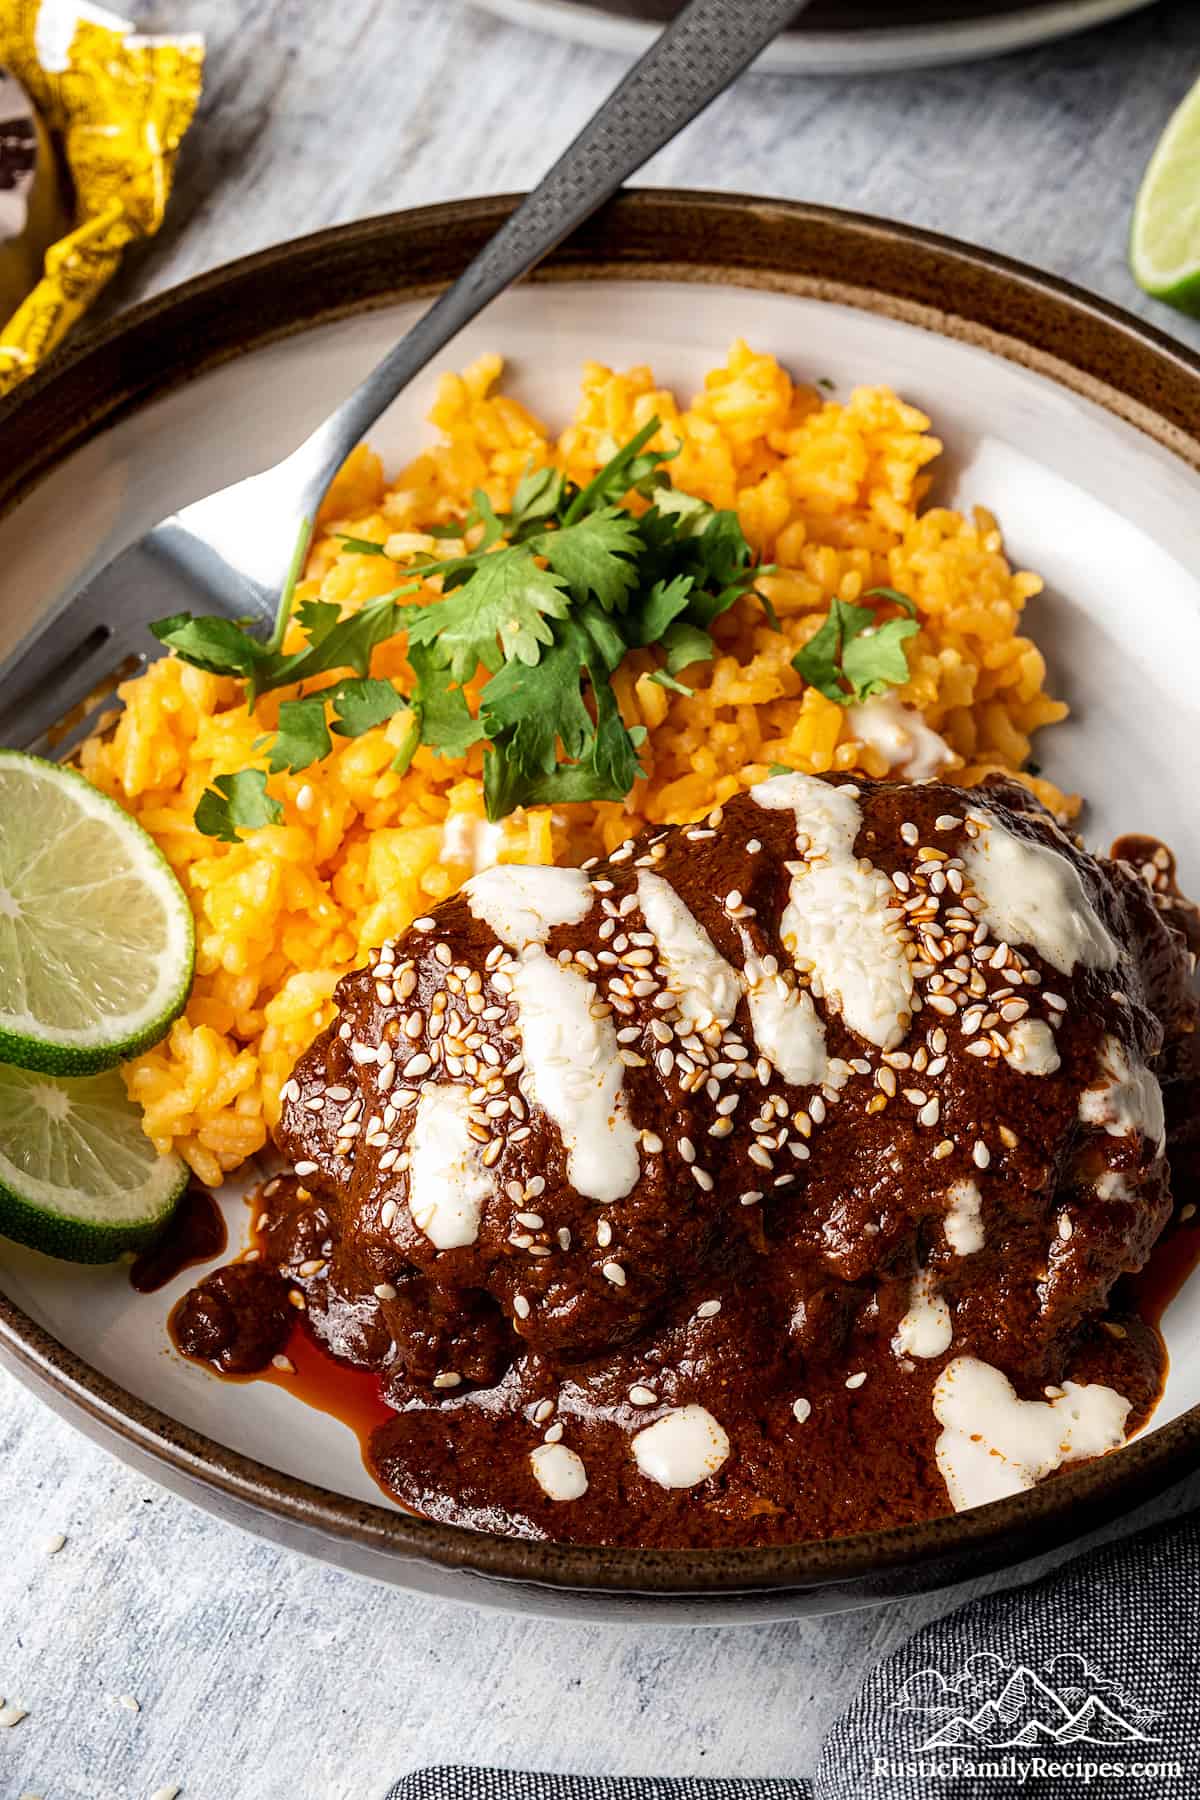 Mole con pollo with Mexican crema and sesame seeds, served with red rice and lemon wedges.